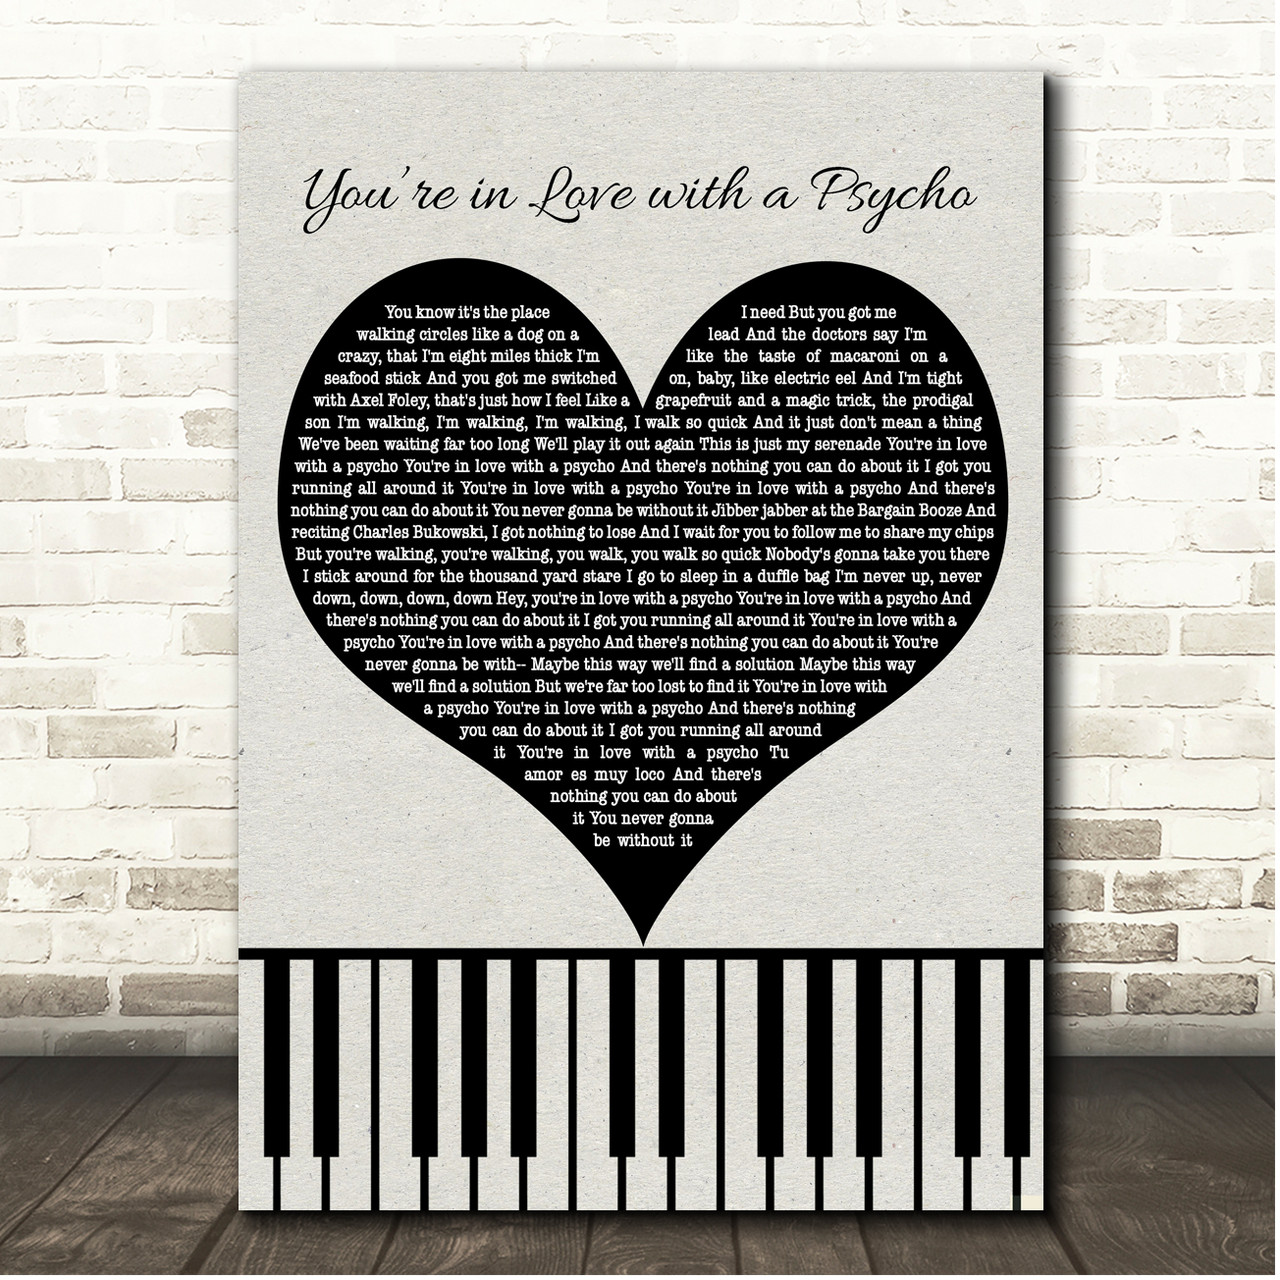 Piano/Keyboard Diagram Collection by Little Wise Hearts